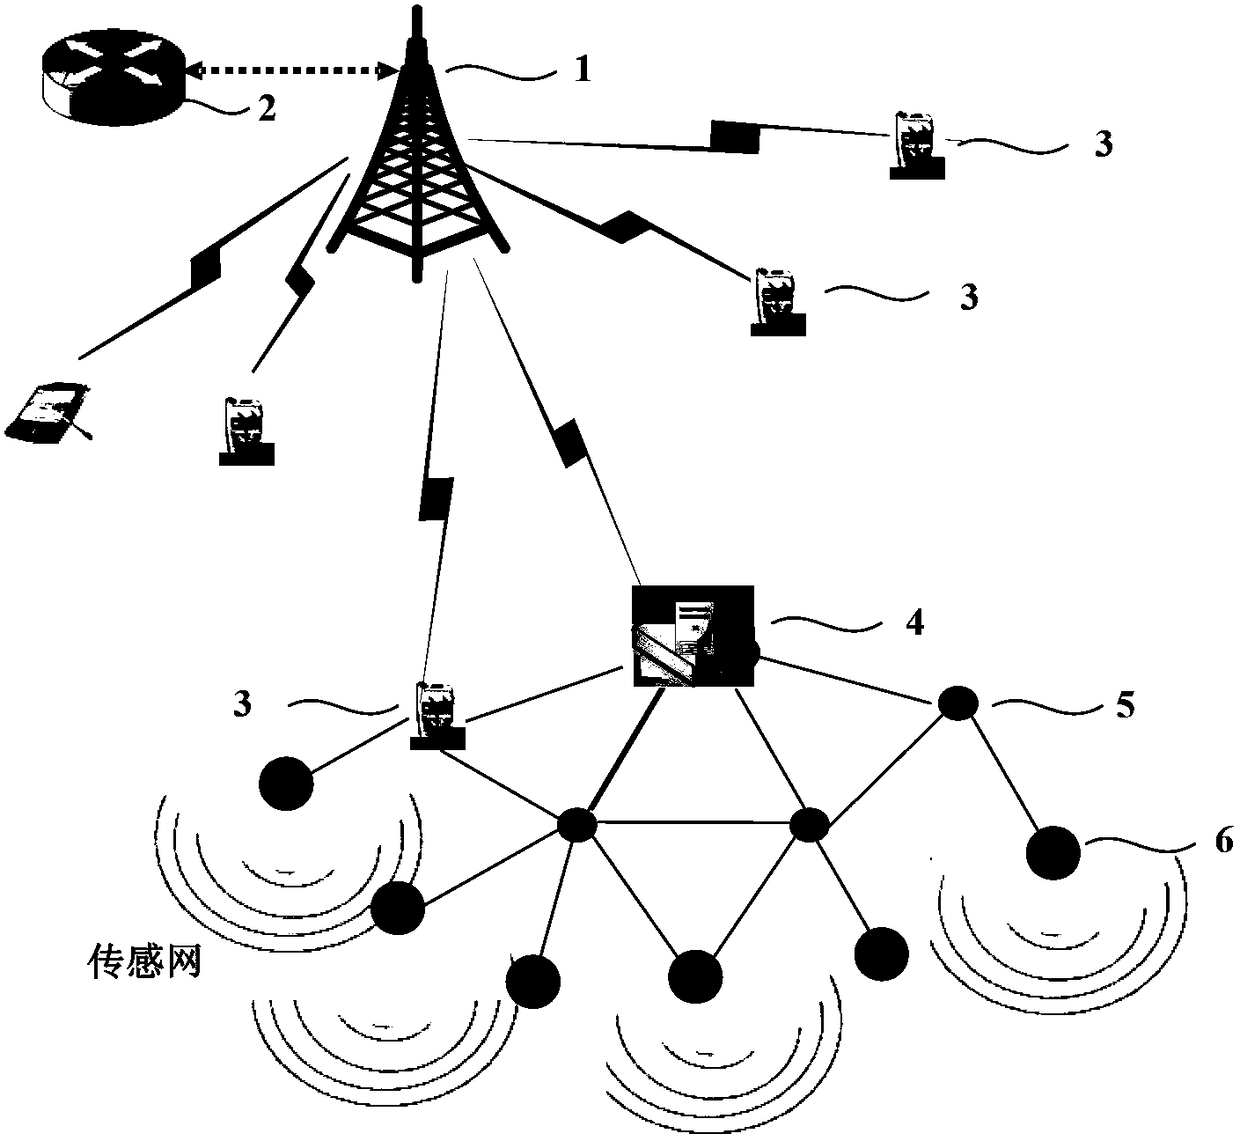 An Address Assignment Method Based on Heterogeneous Mesh Network Convergence